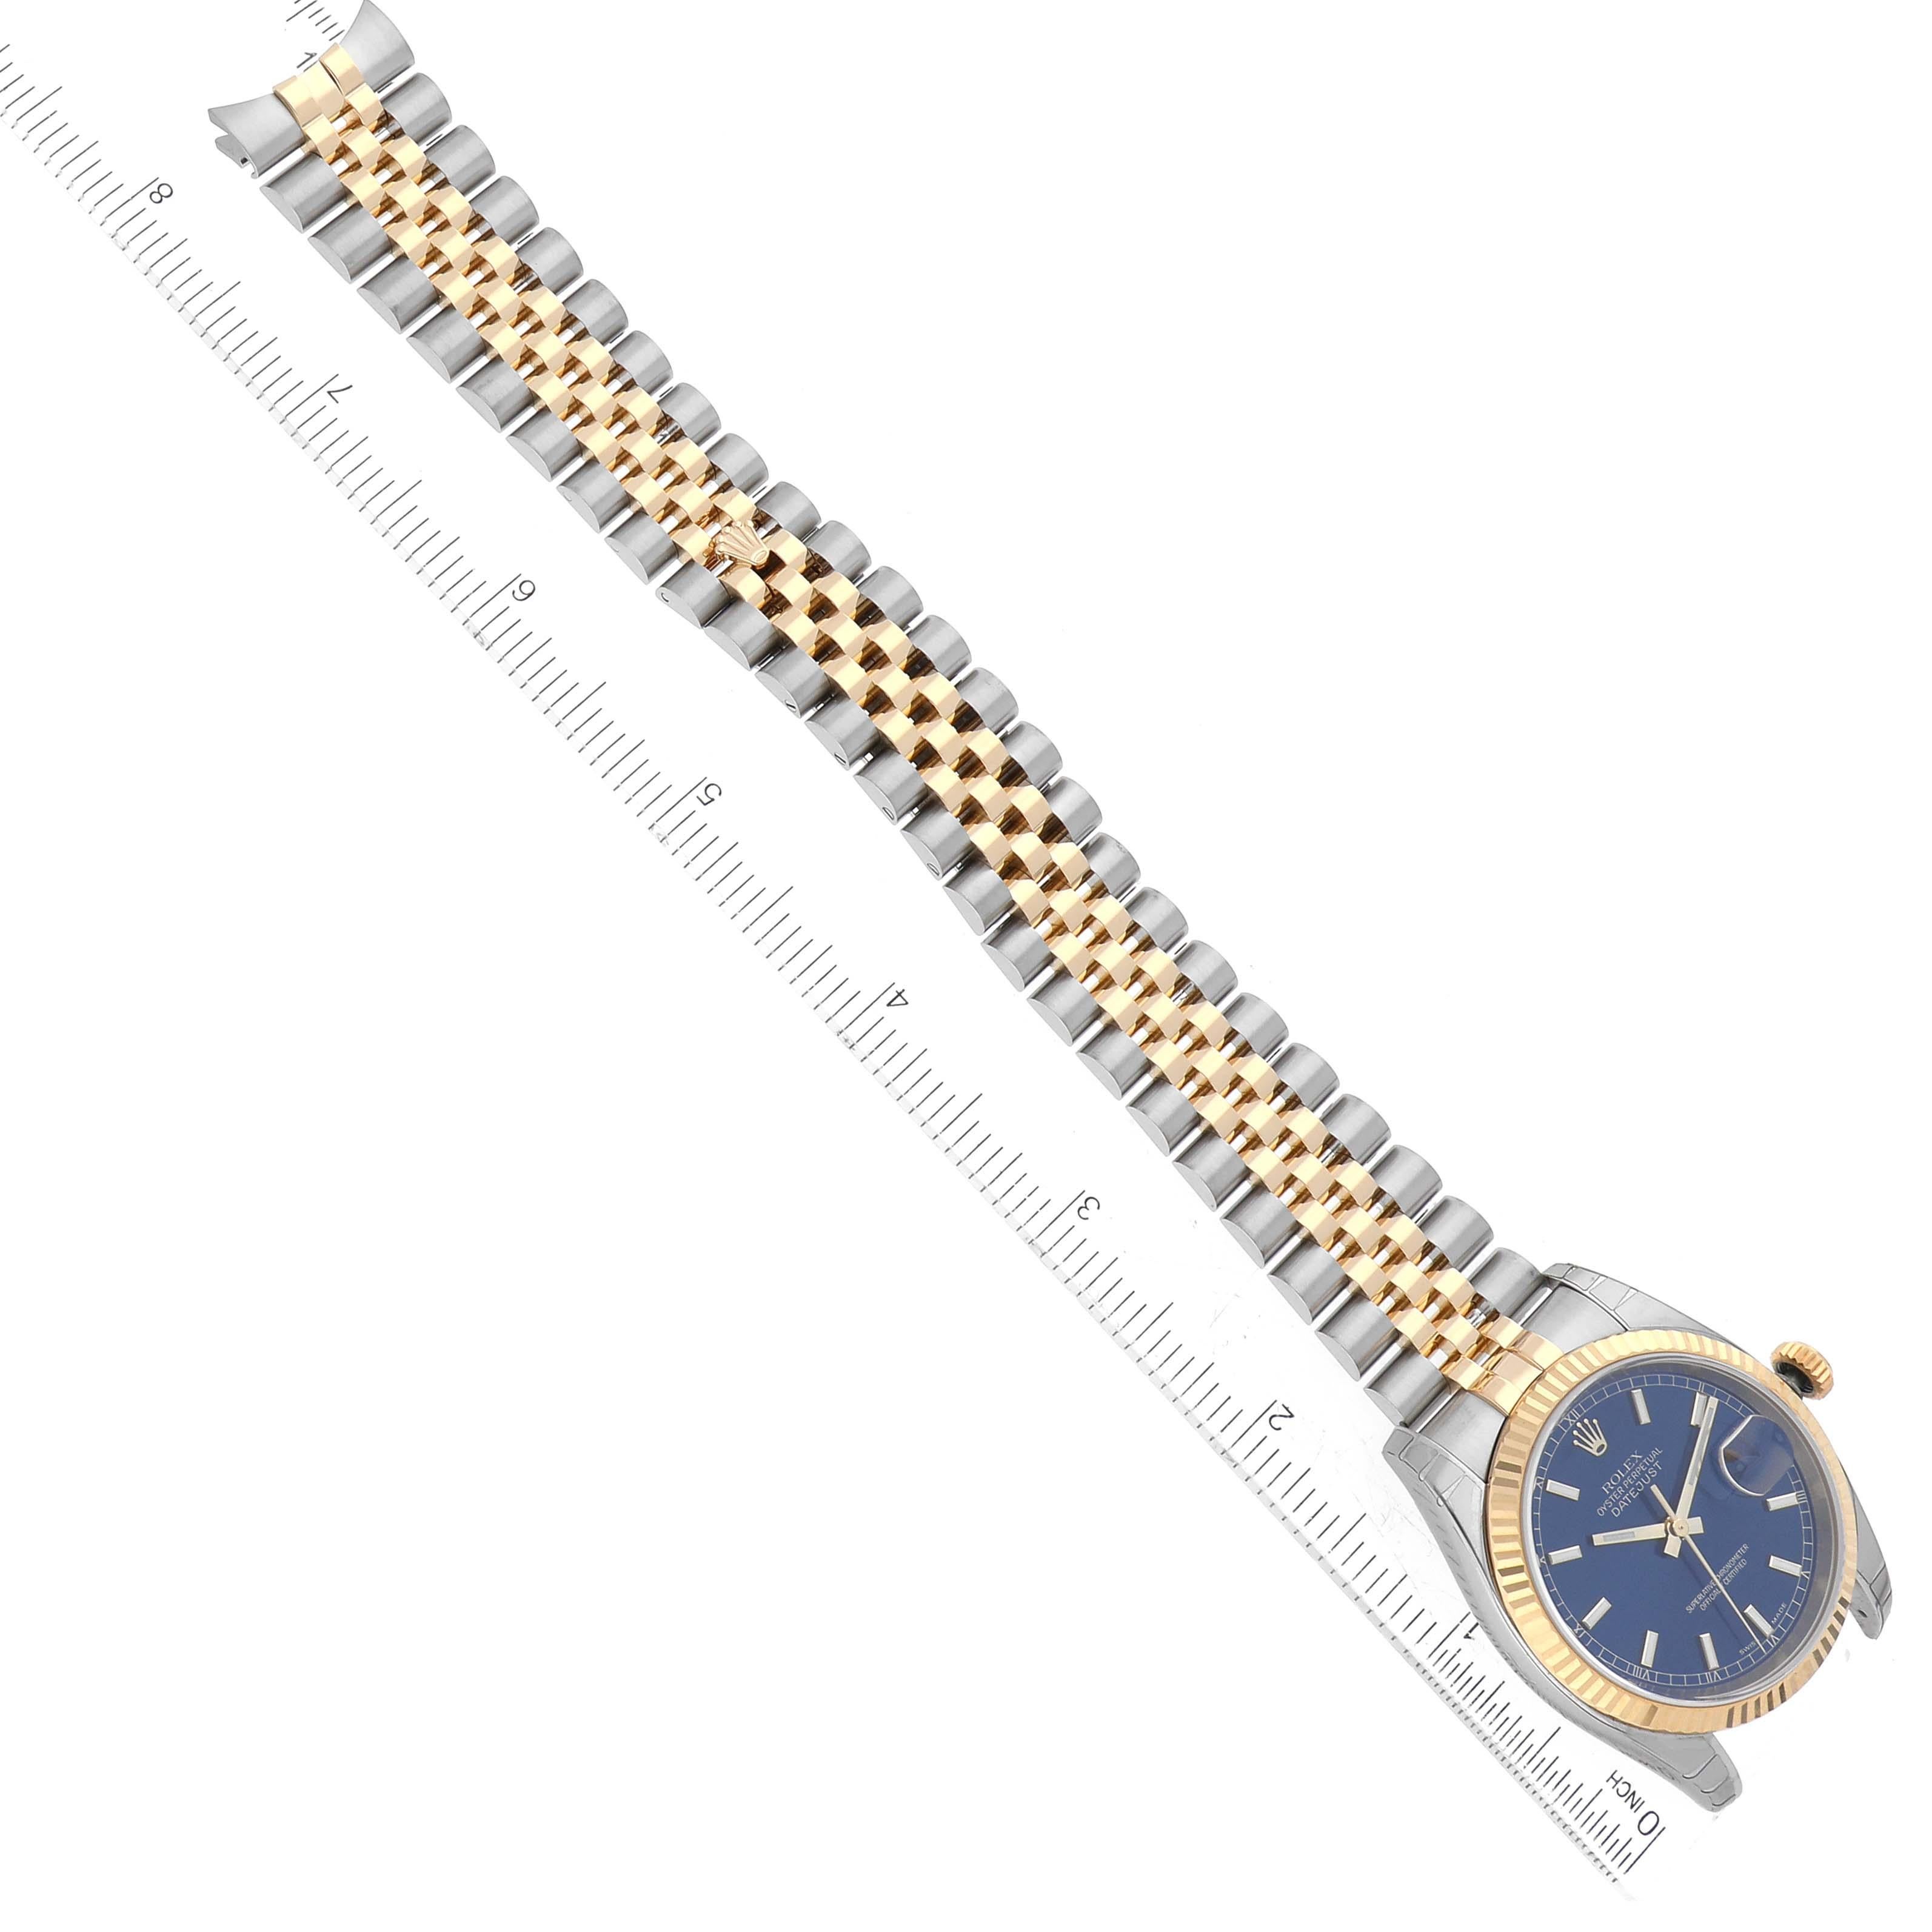 Rolex Datejust Steel Yellow Gold Blue Dial Mens Watch 116233 Box Papers 4